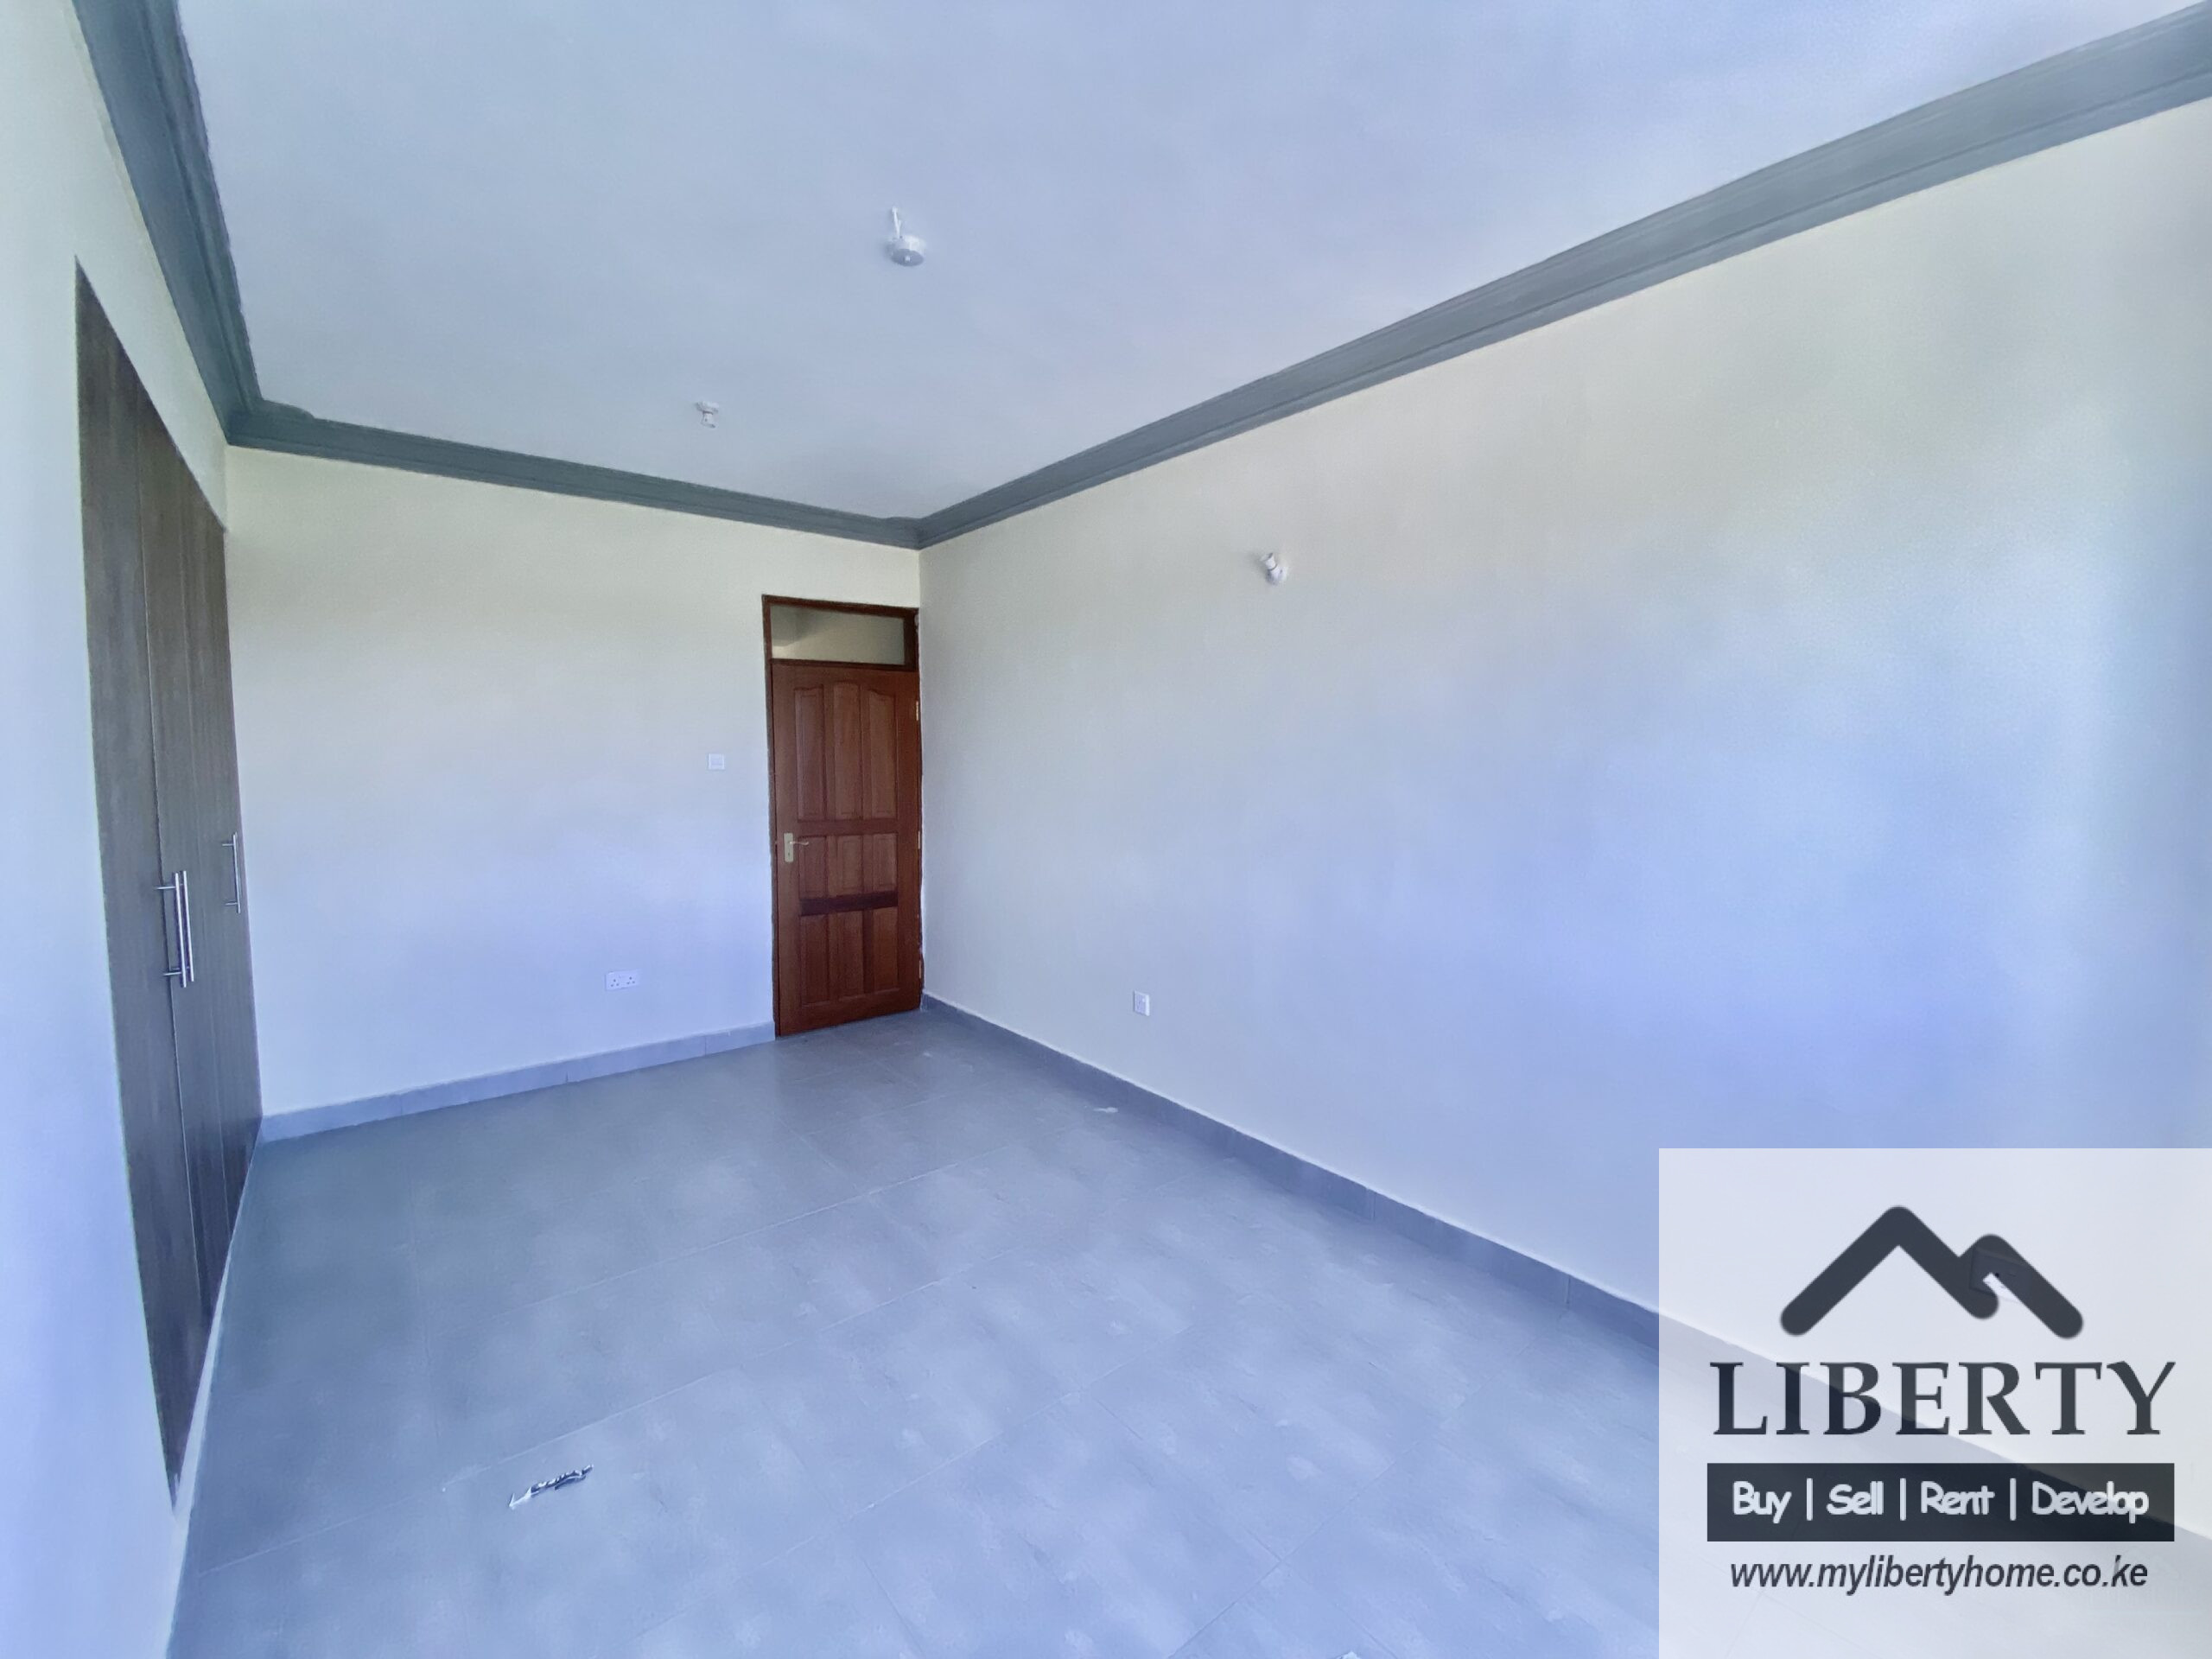 Up Market 2 Bedroom Apartment In Mombasa-Nyali For Sale-10M- Ref-799